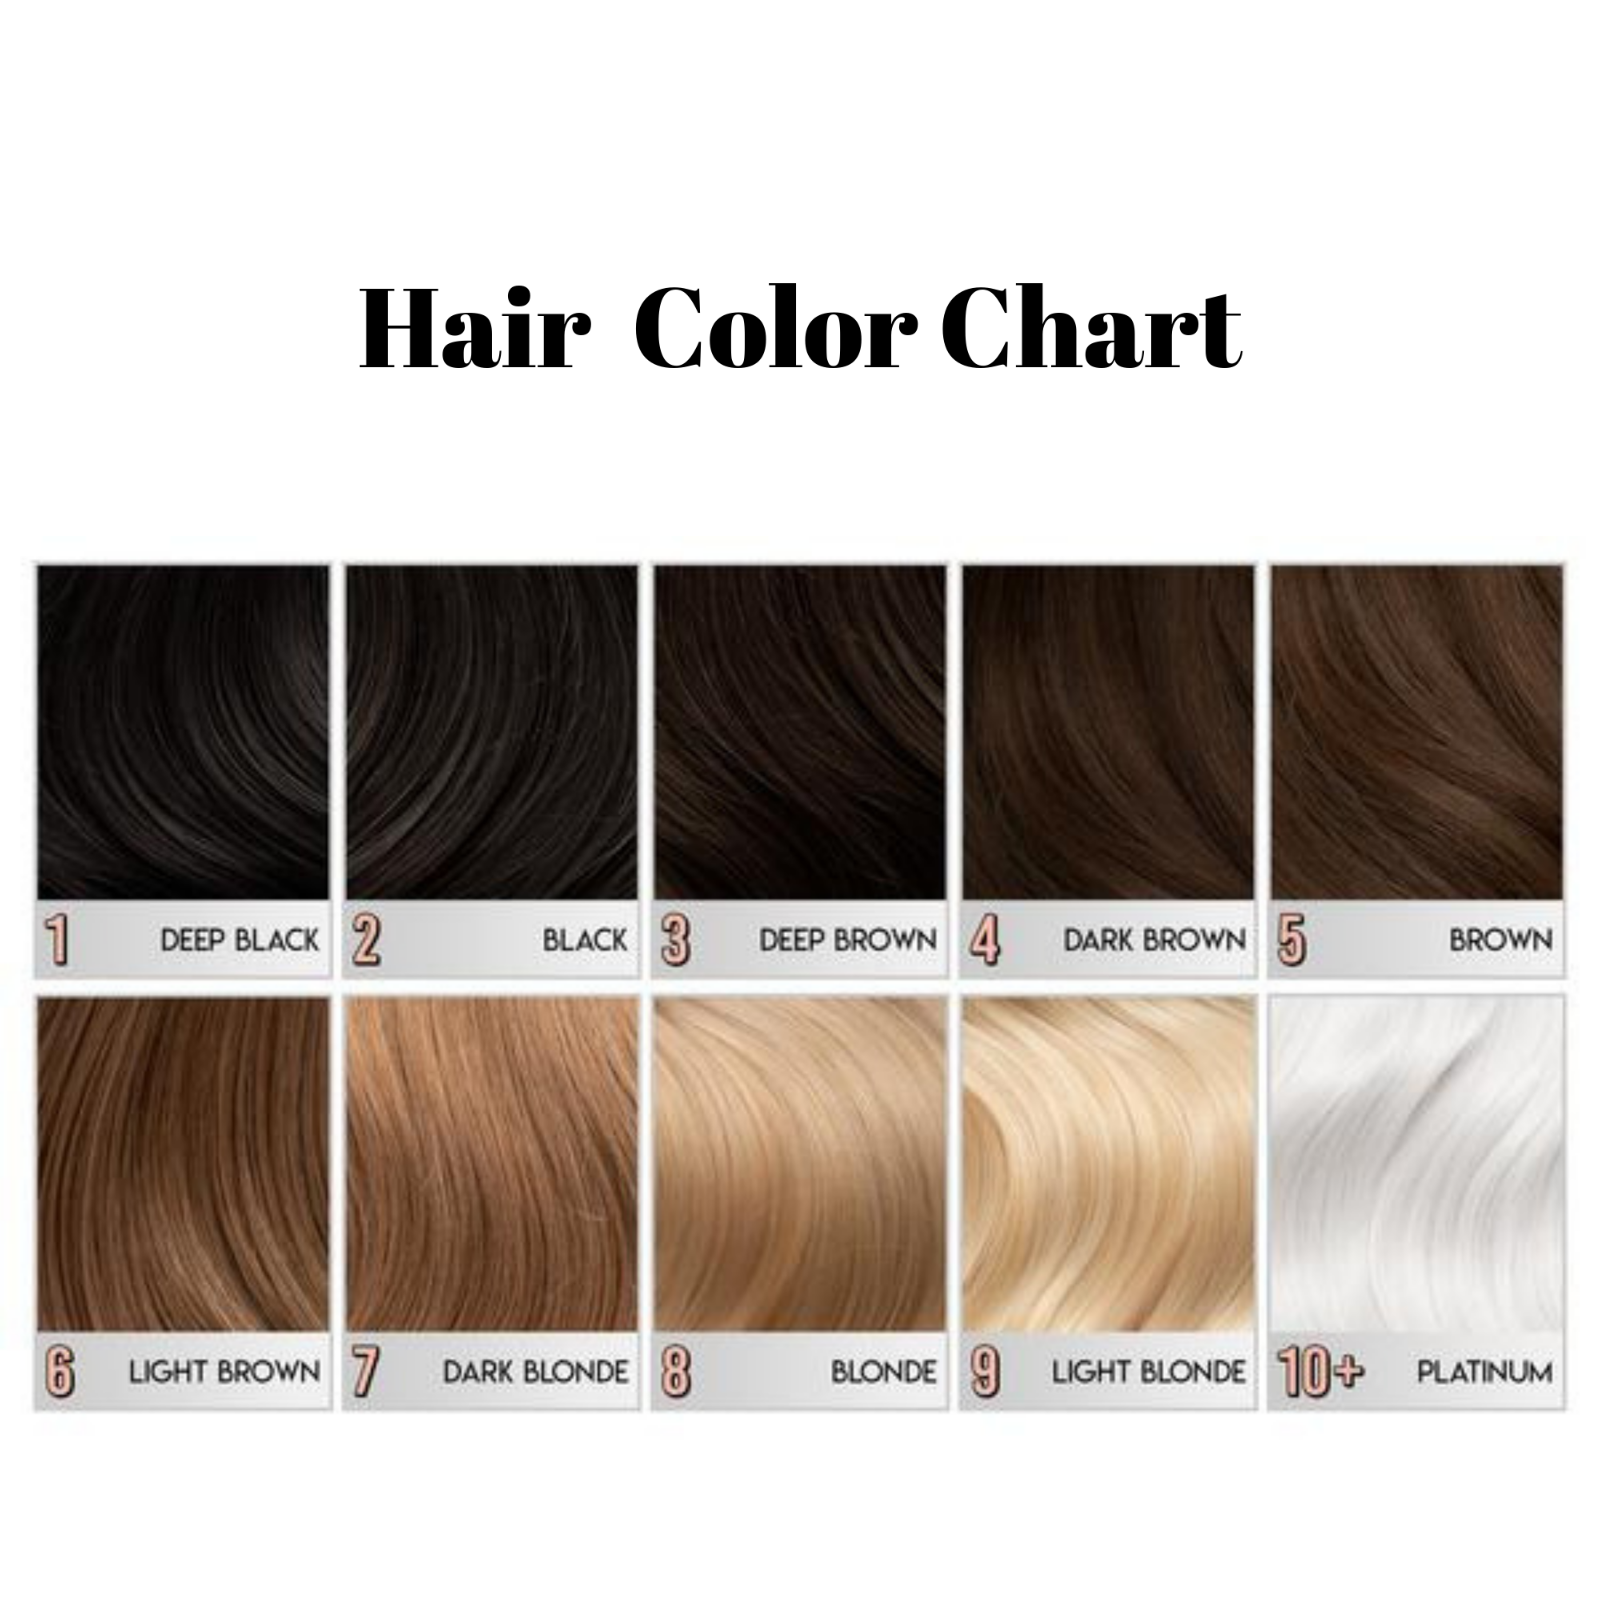 Level 9 Hair Color Chart